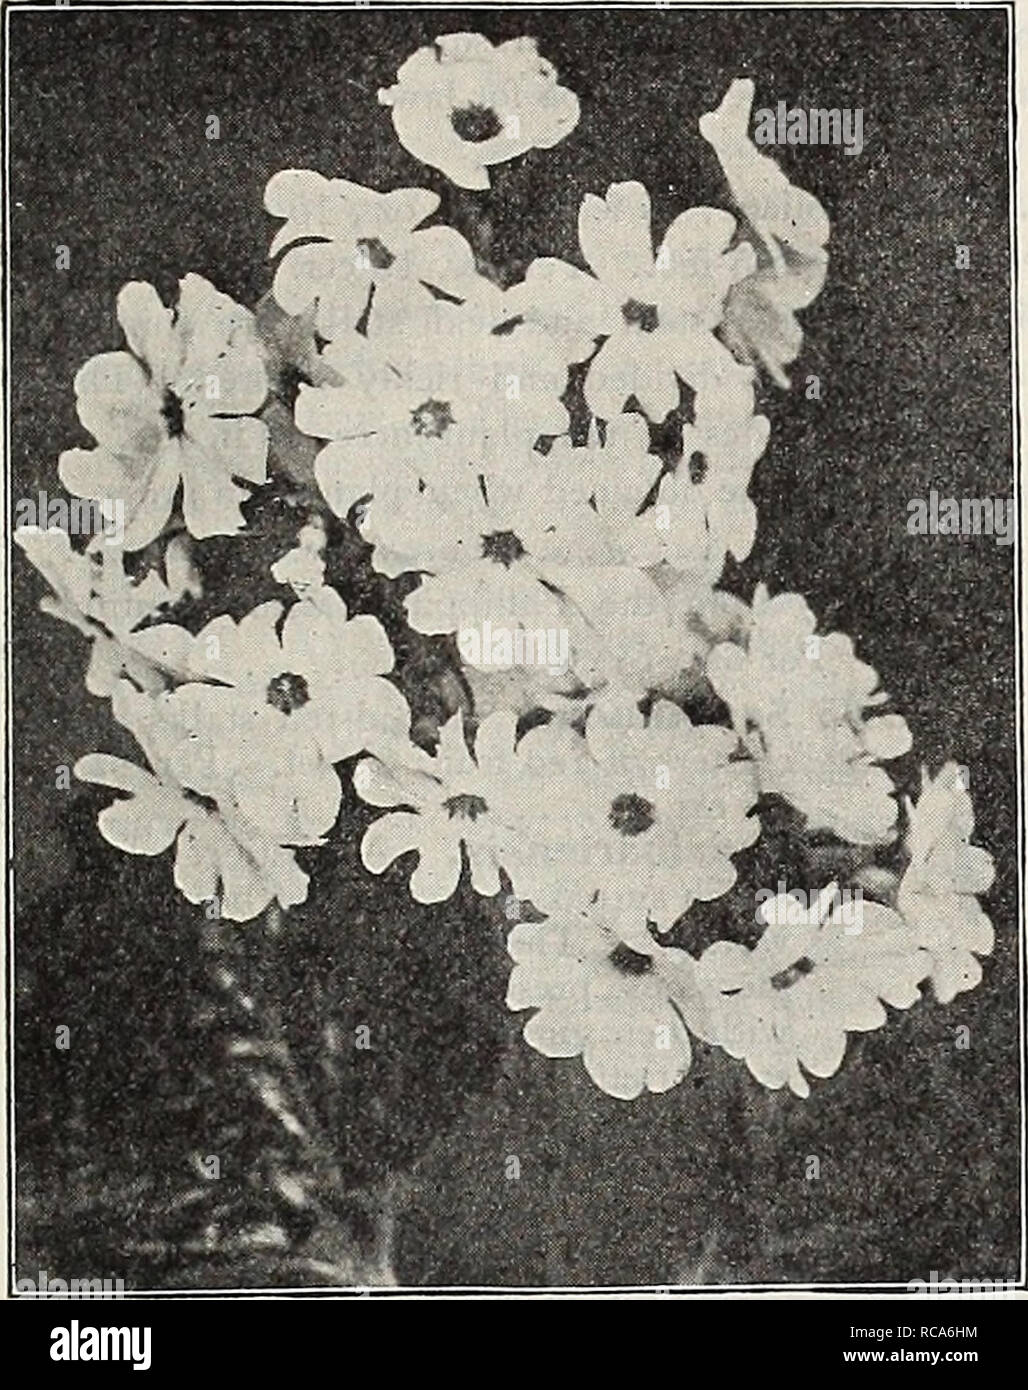 . Dreer's garden book : seventy-third annual edition 1911. Seeds Catalogs; Nursery stock Catalogs; Gardening Equipment and supplies Catalogs; Flowers Seeds Catalogs; Vegetables Seeds Catalogs; Fruit Seeds Catalogs. HENRTADREER -PtlllADELPIW RELIABLE FLOWER SEEDS 116. Primula Obconica Grandiflora. Large=flowering CHINESE PRIMROSES, PER PKT. 3782 Alba Magnifica. The finest pure white 25 3783 Covent Garden Red. 'A fine rosy red 25 3787 Rosy Horn. Beautiful deli- cate pink 50 Holborn Blue. Unique shade. 50 Stellata. A very pretty form with large heads of star-shaped flowers of various colors; a sp Stock Photo